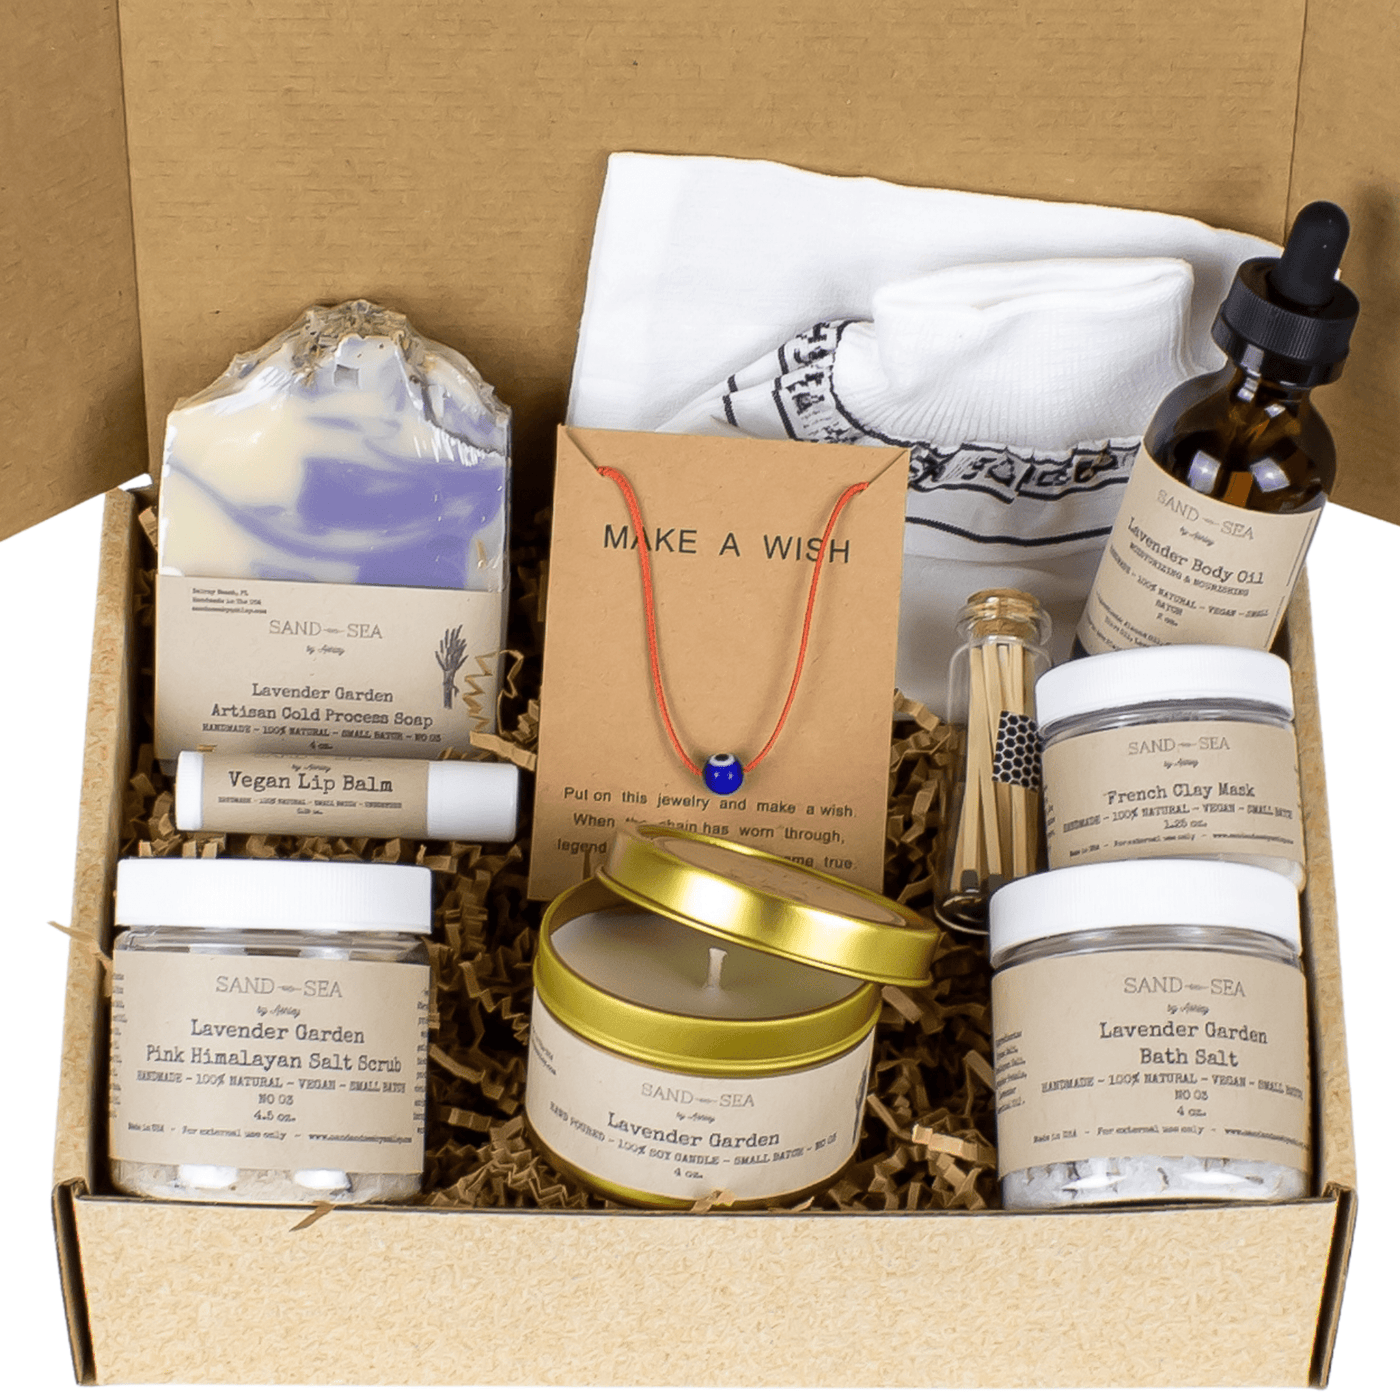 Spa Gift Basket for Women - 10 pieces Luxury Lavender Spa Gift Set for Her - Sand & Sea by Ashley